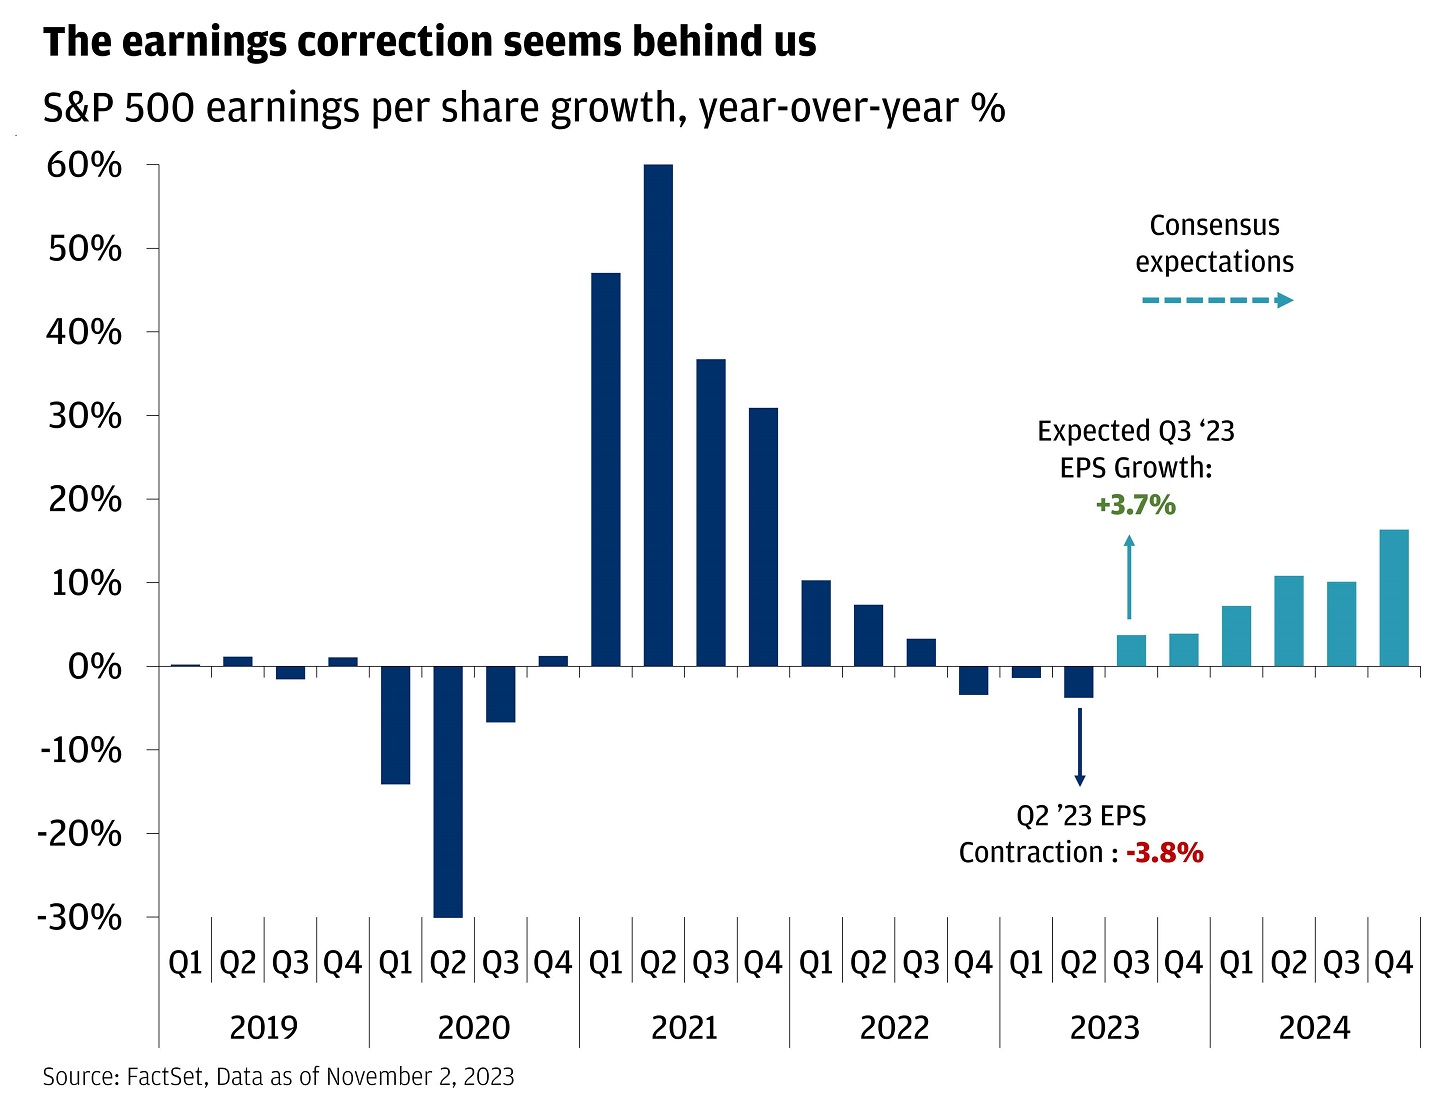 This bar graph shows the S&P 500 earnings per share growth, year-over-year as a percentage.